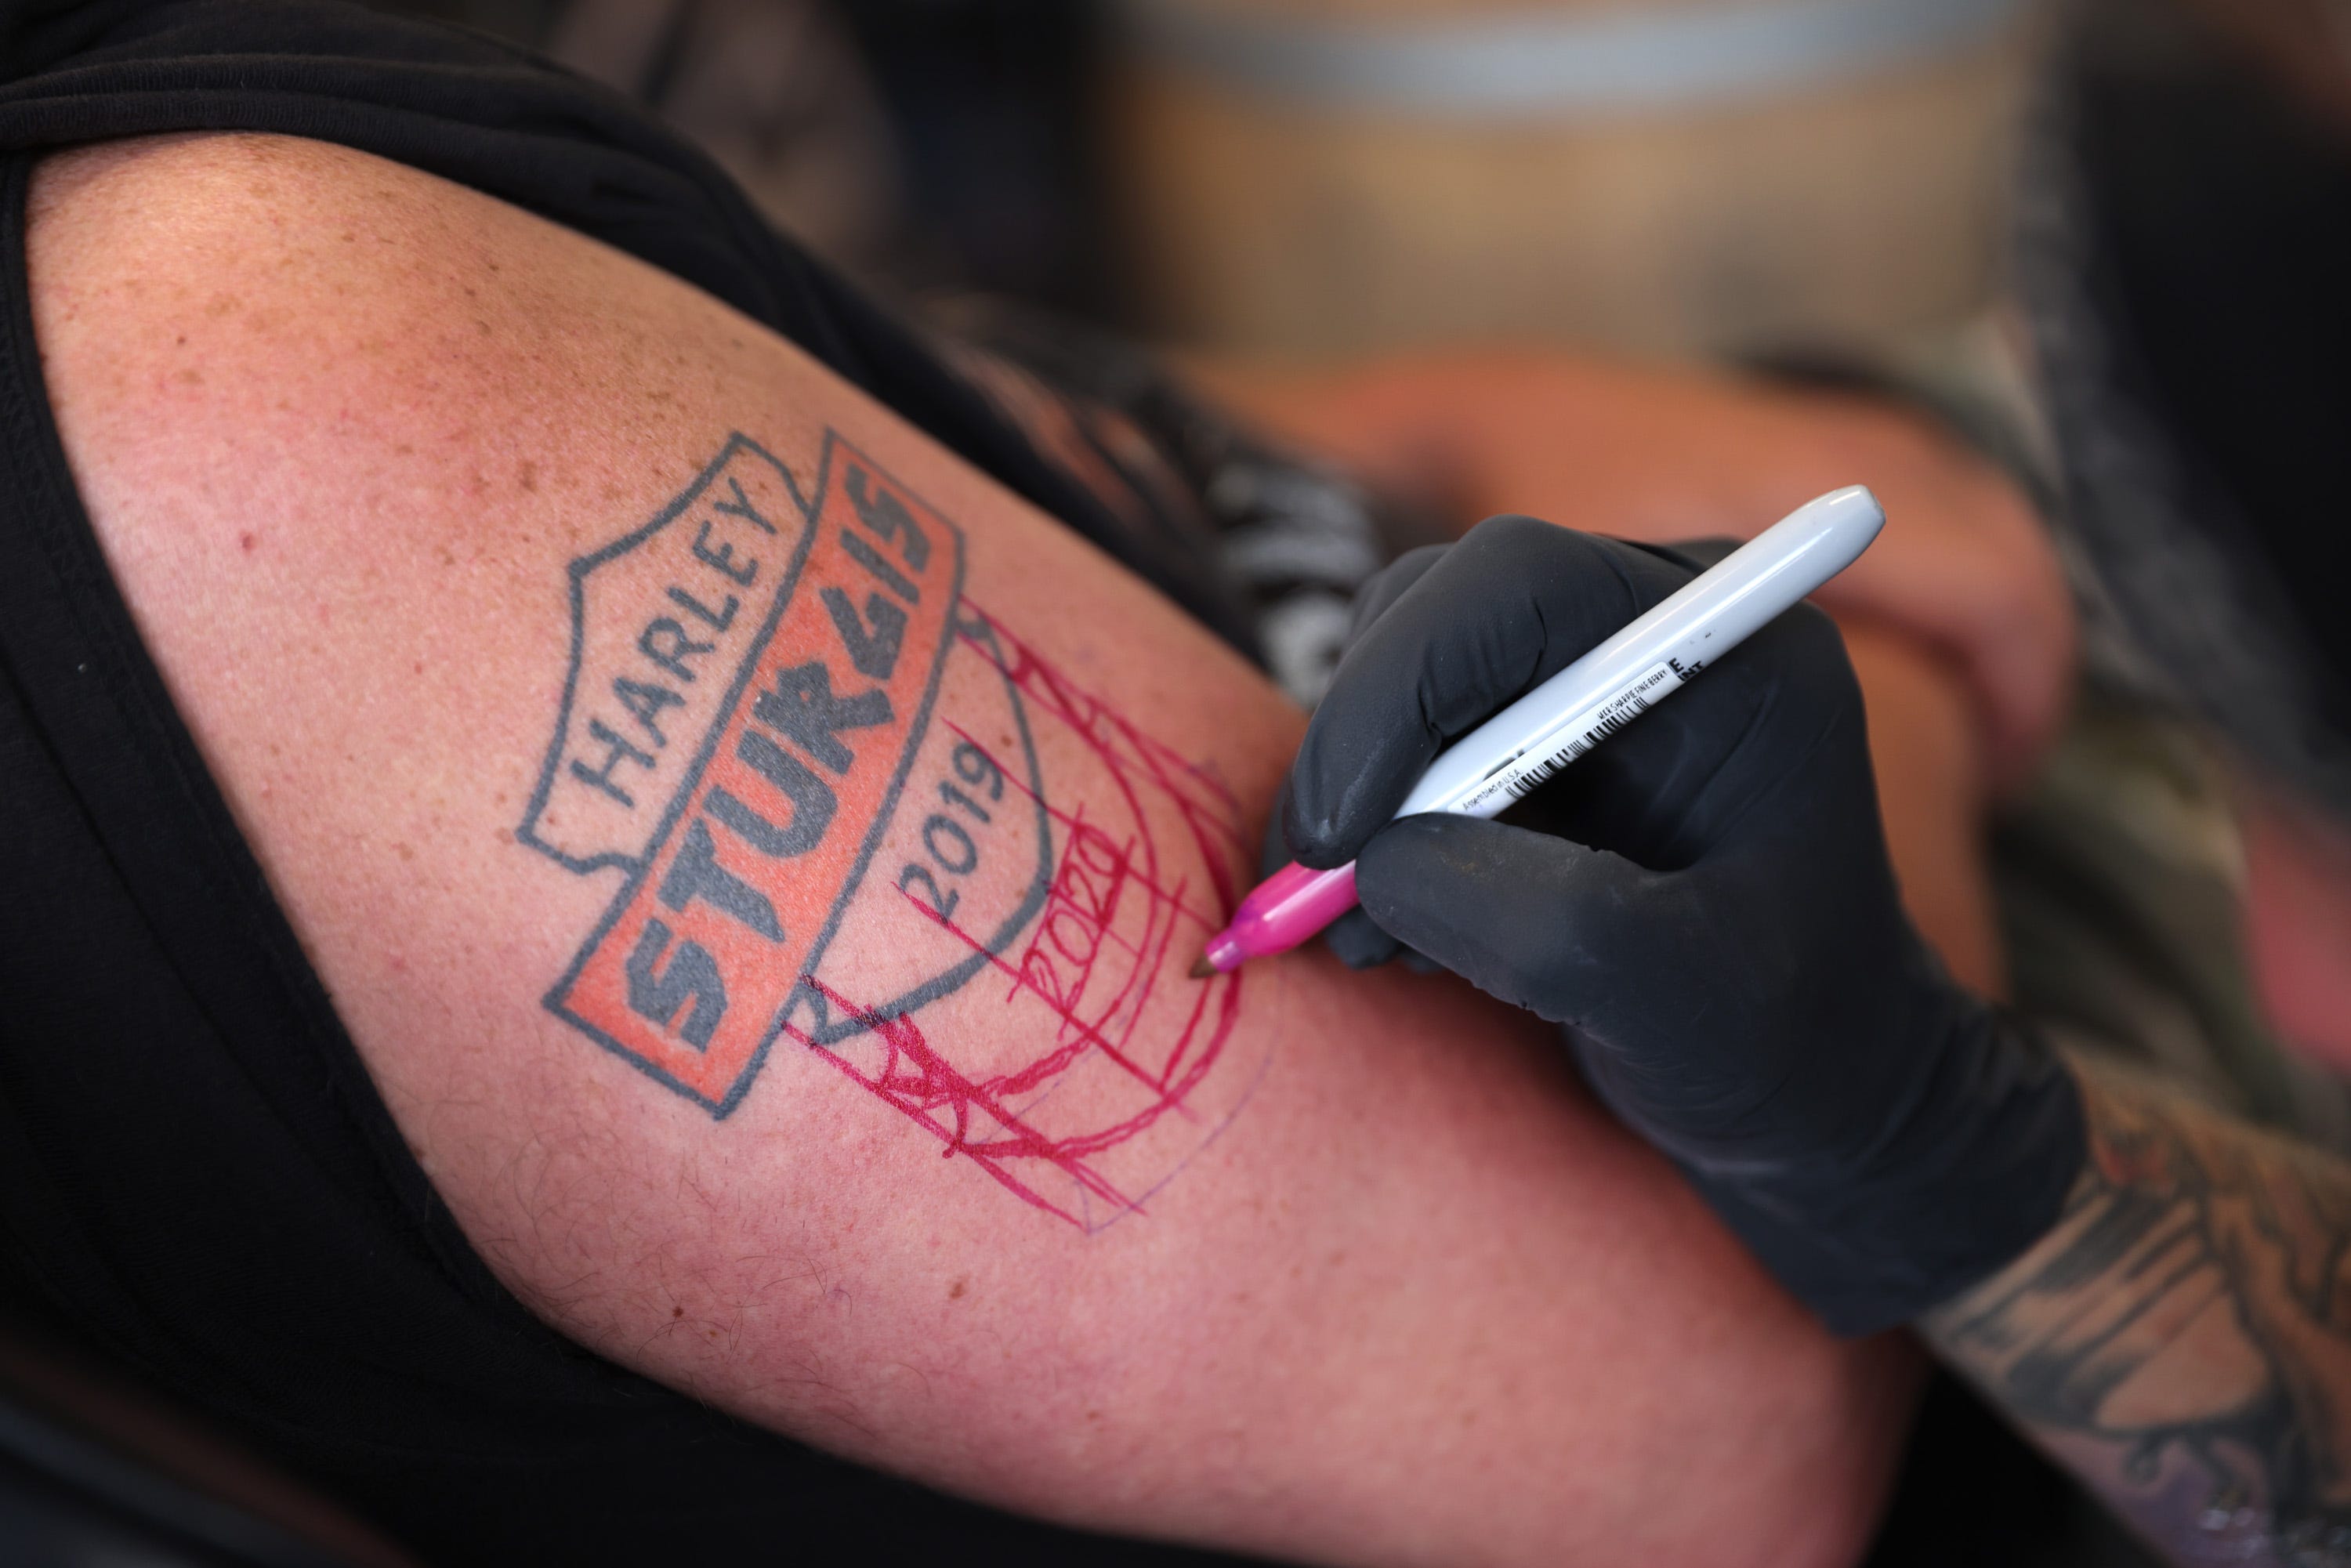 Whats In Tattoo Ink Scientists Explore Safety Of 2 Pigments After EU Ban   Shots  Health News  NPR